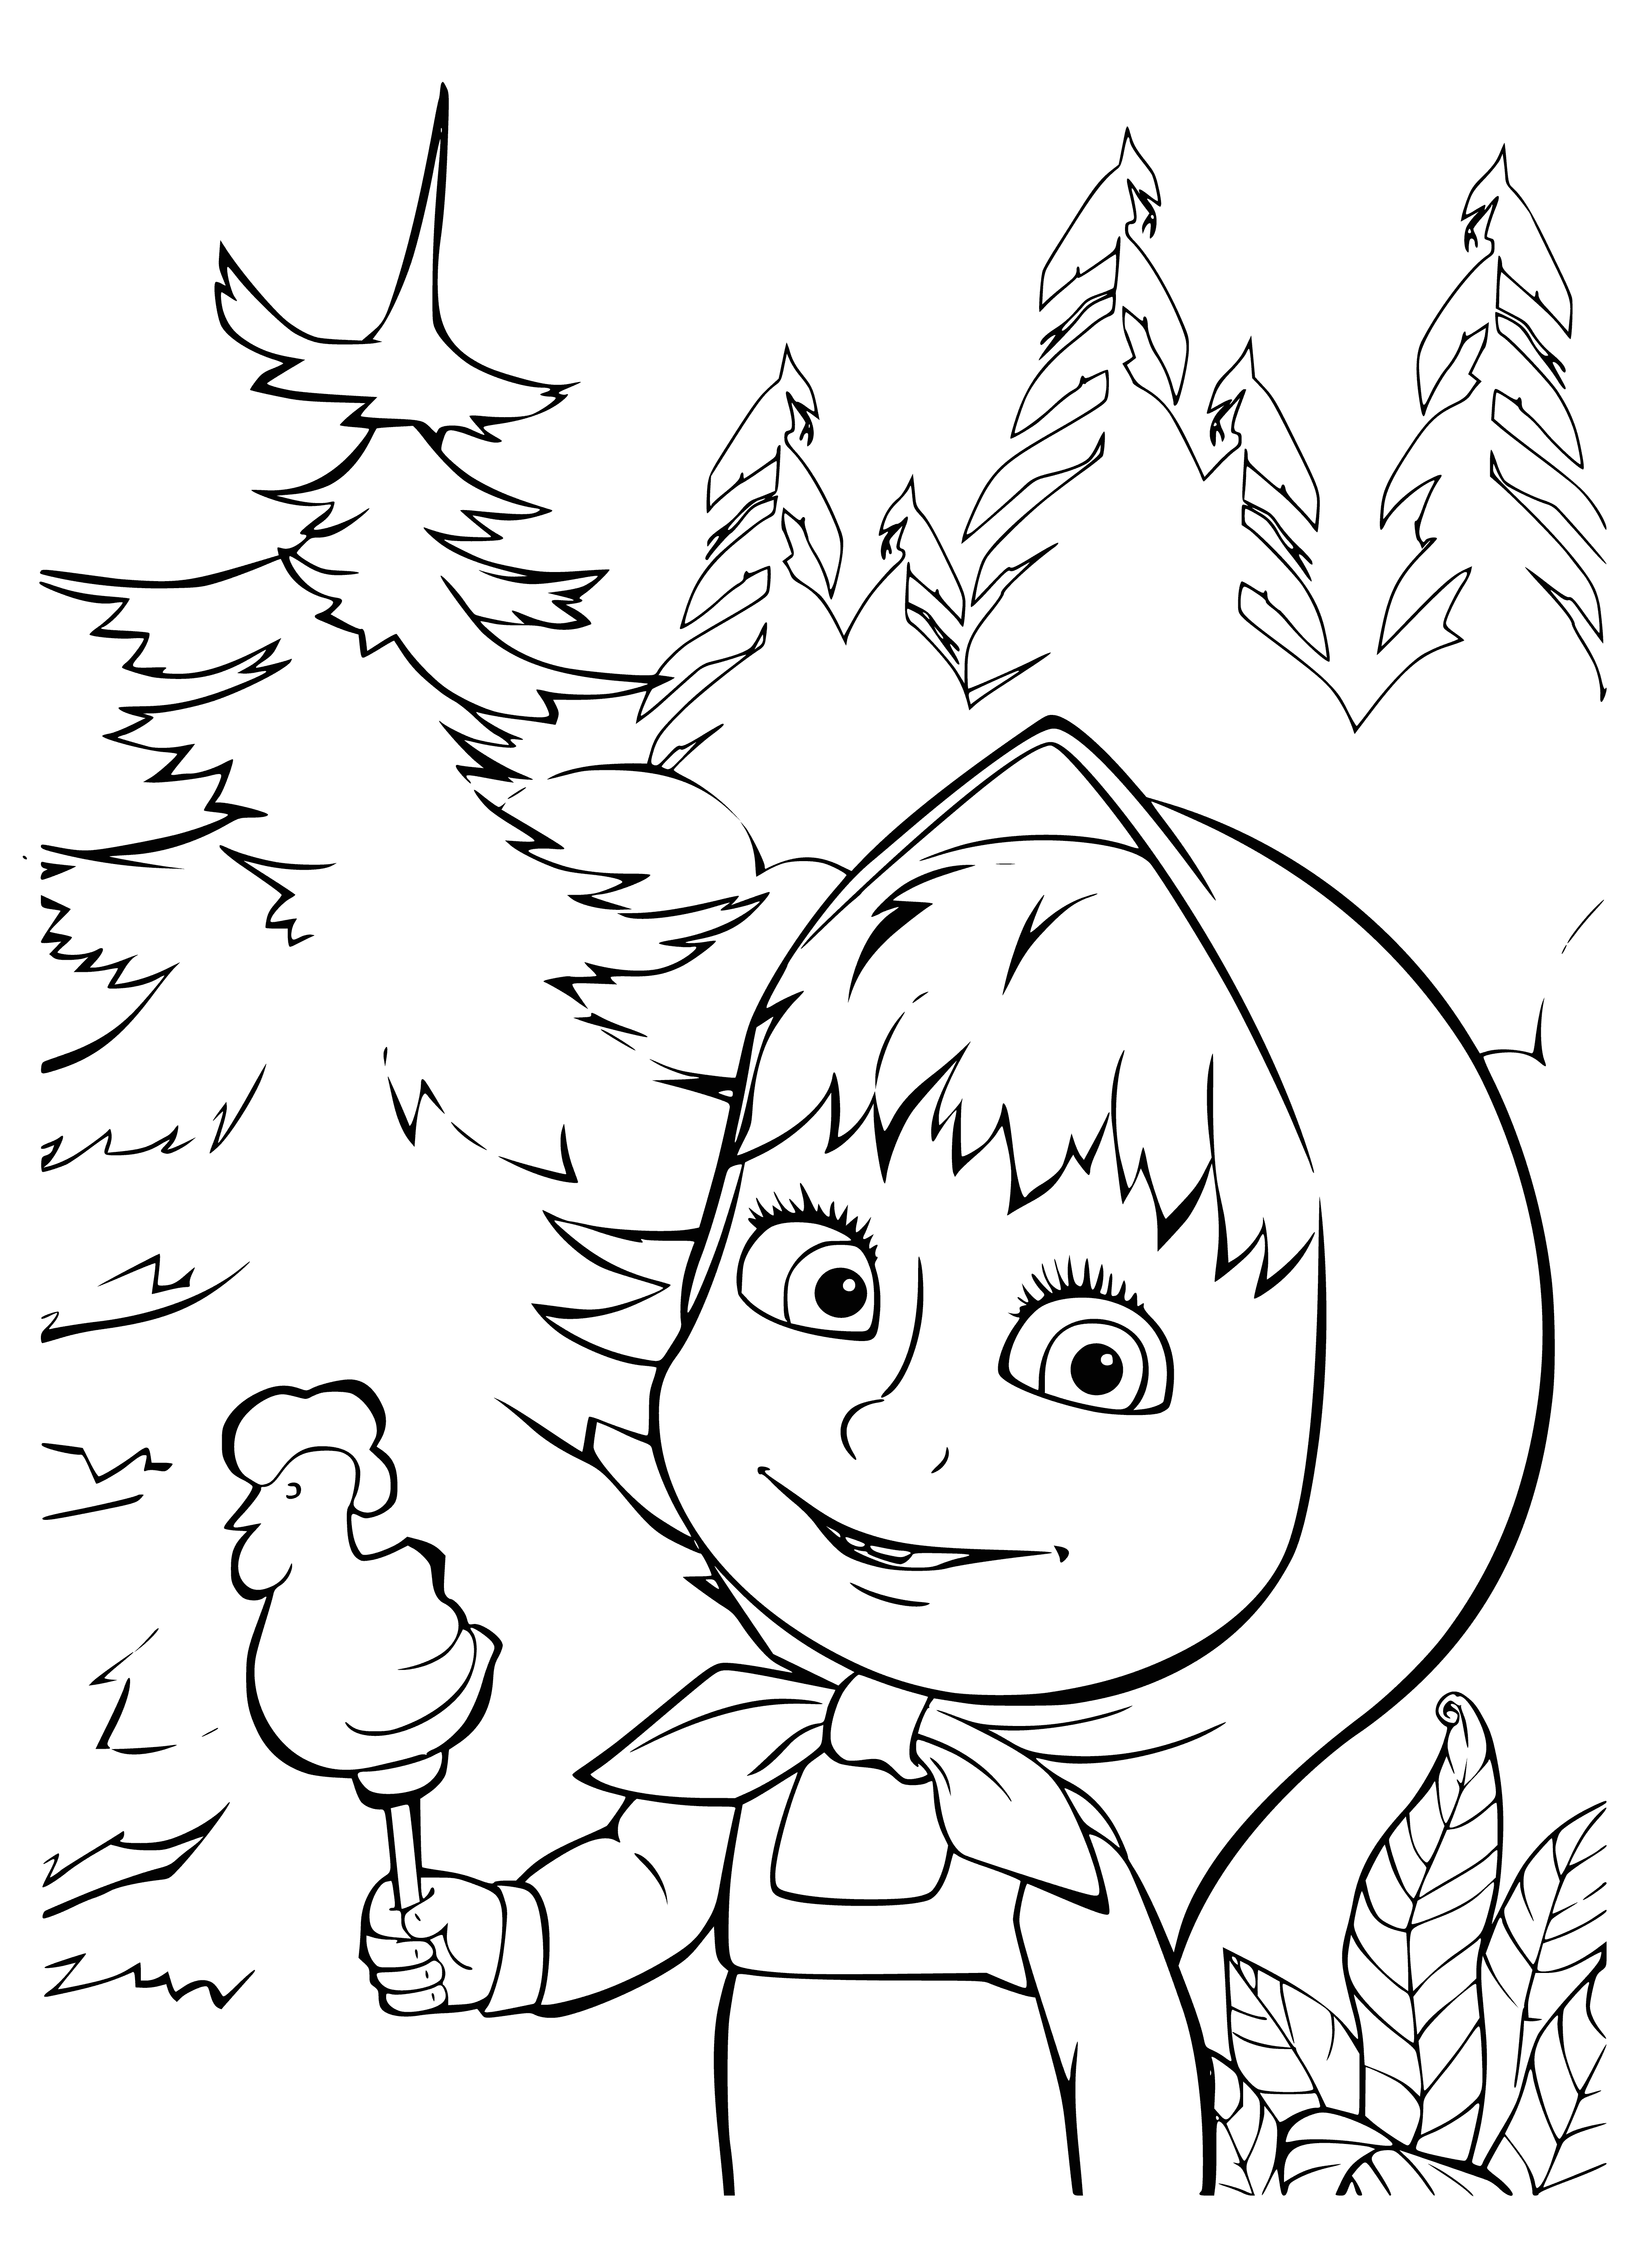 coloring page: A young girl sits atop a colorful lollipop, smiling with glee.